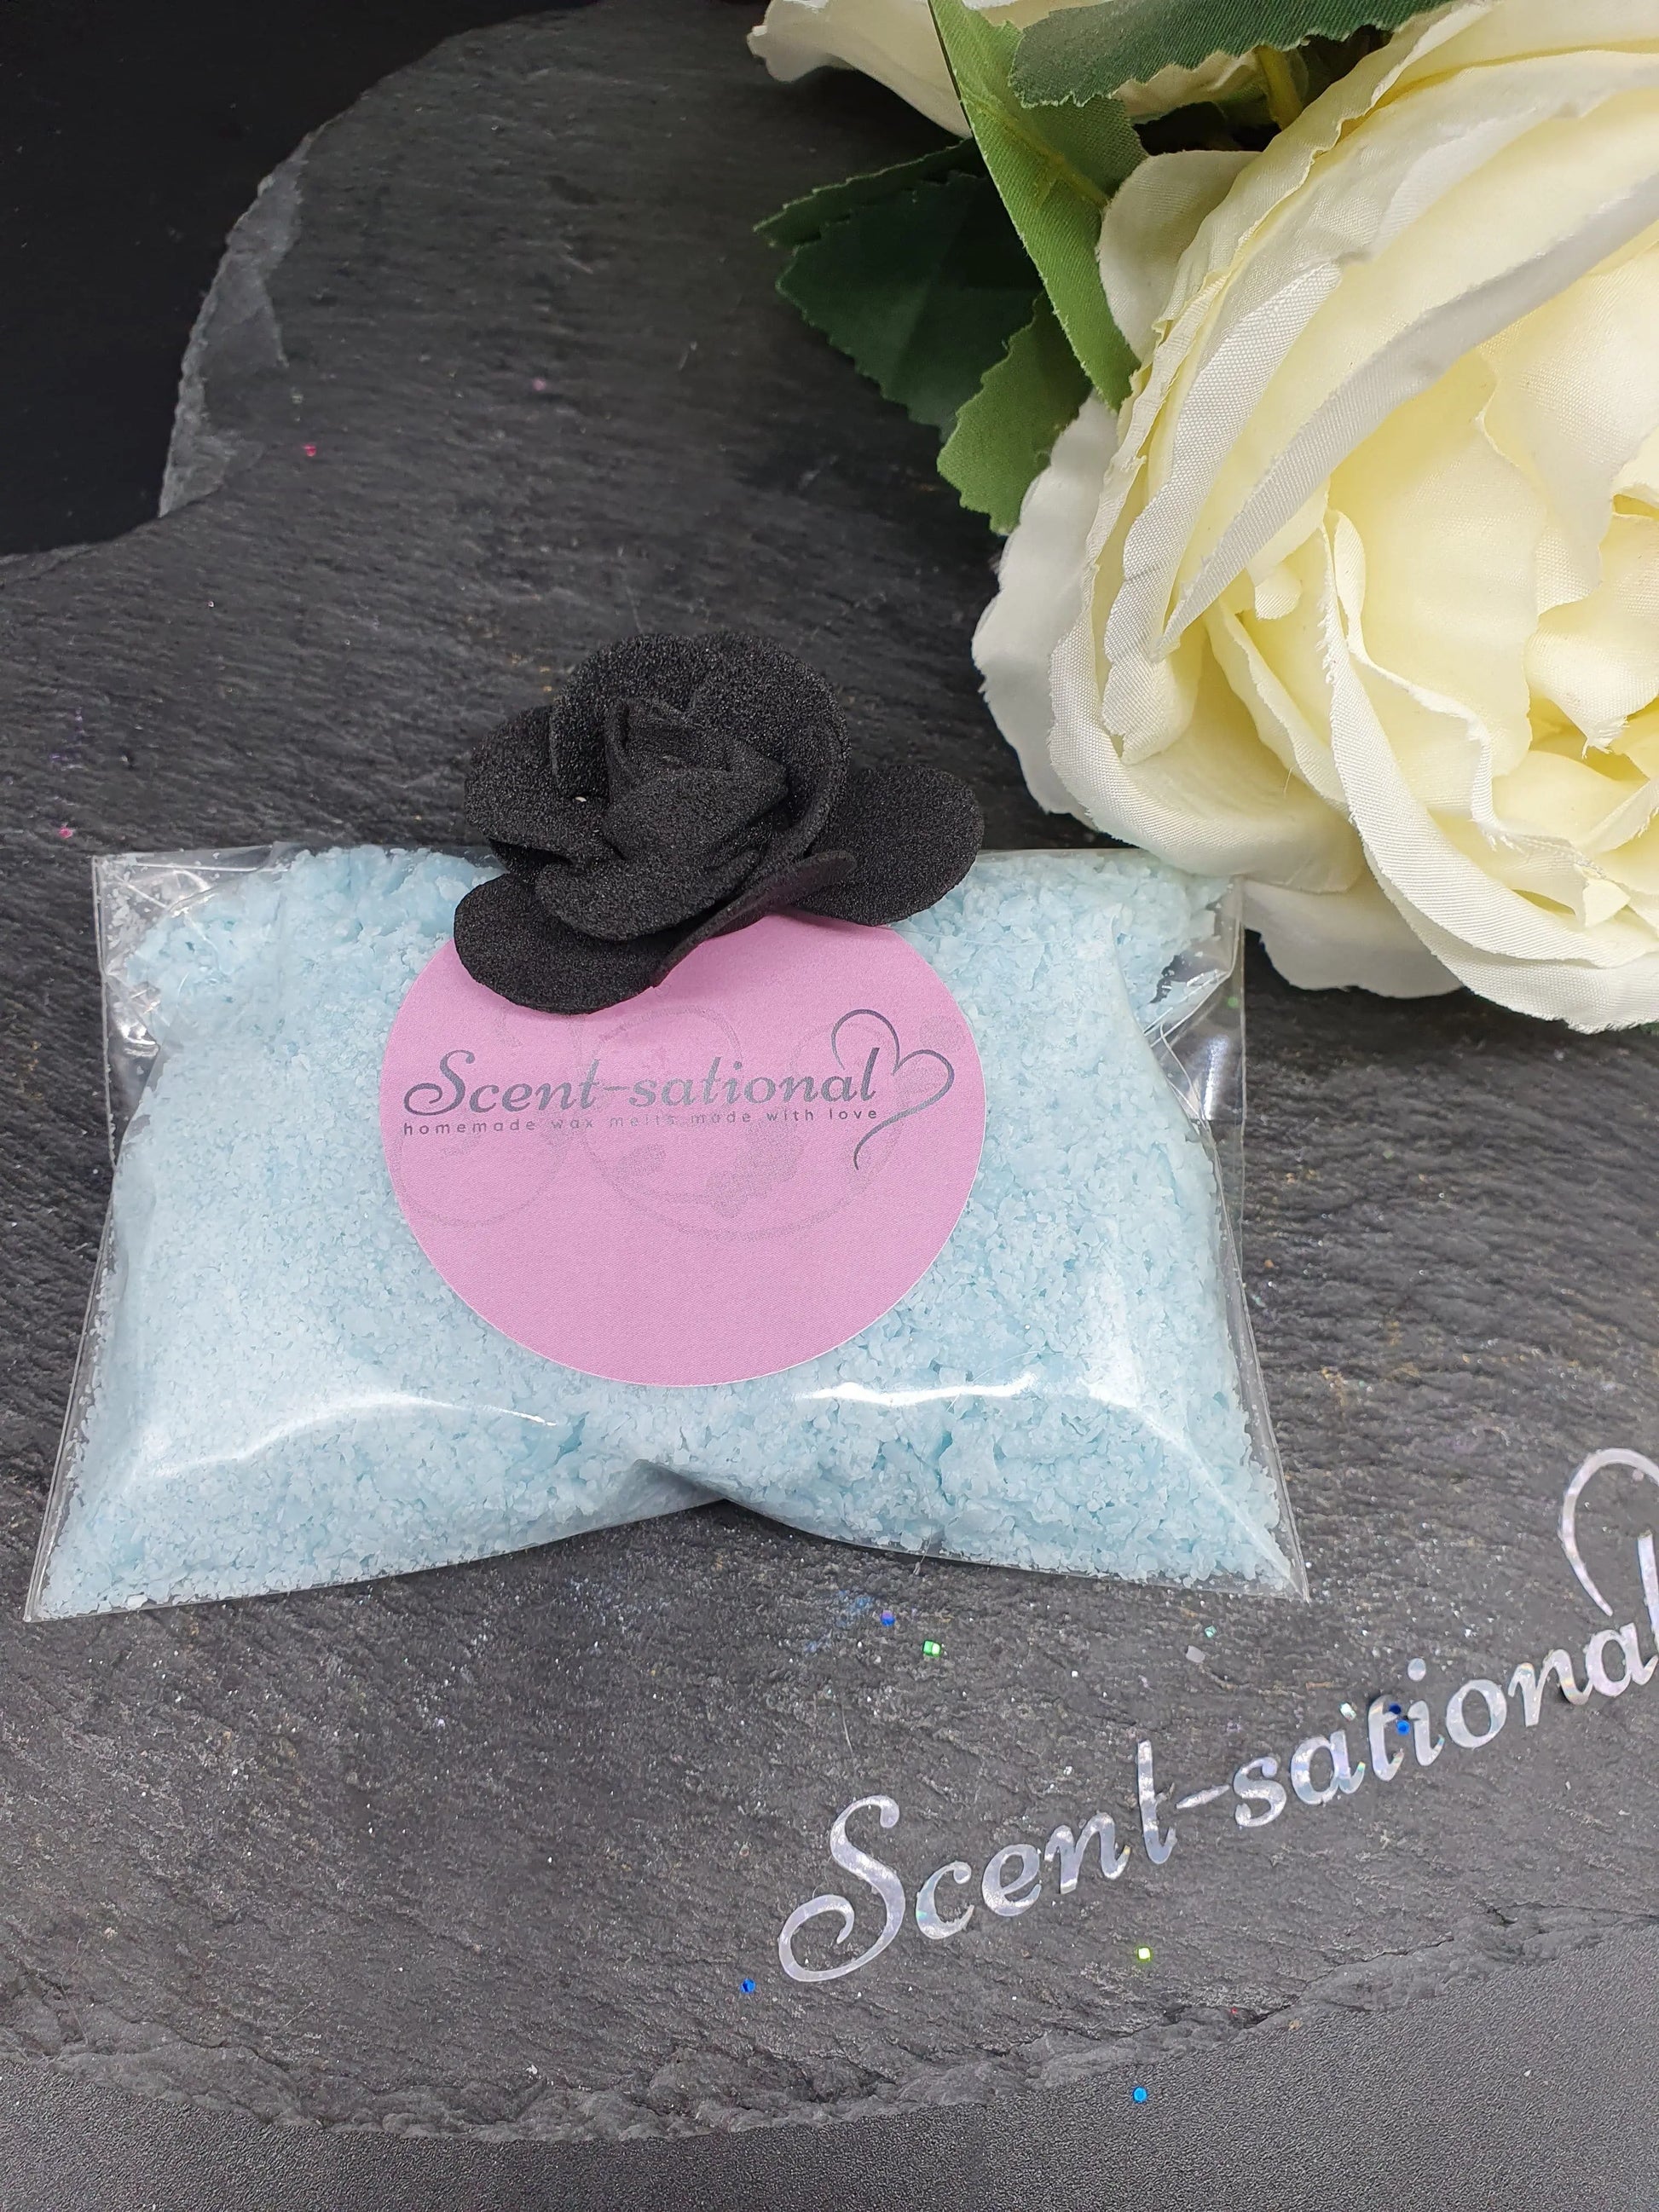 Cool Water Wax Melt Crumble Scent Sational Wax melts